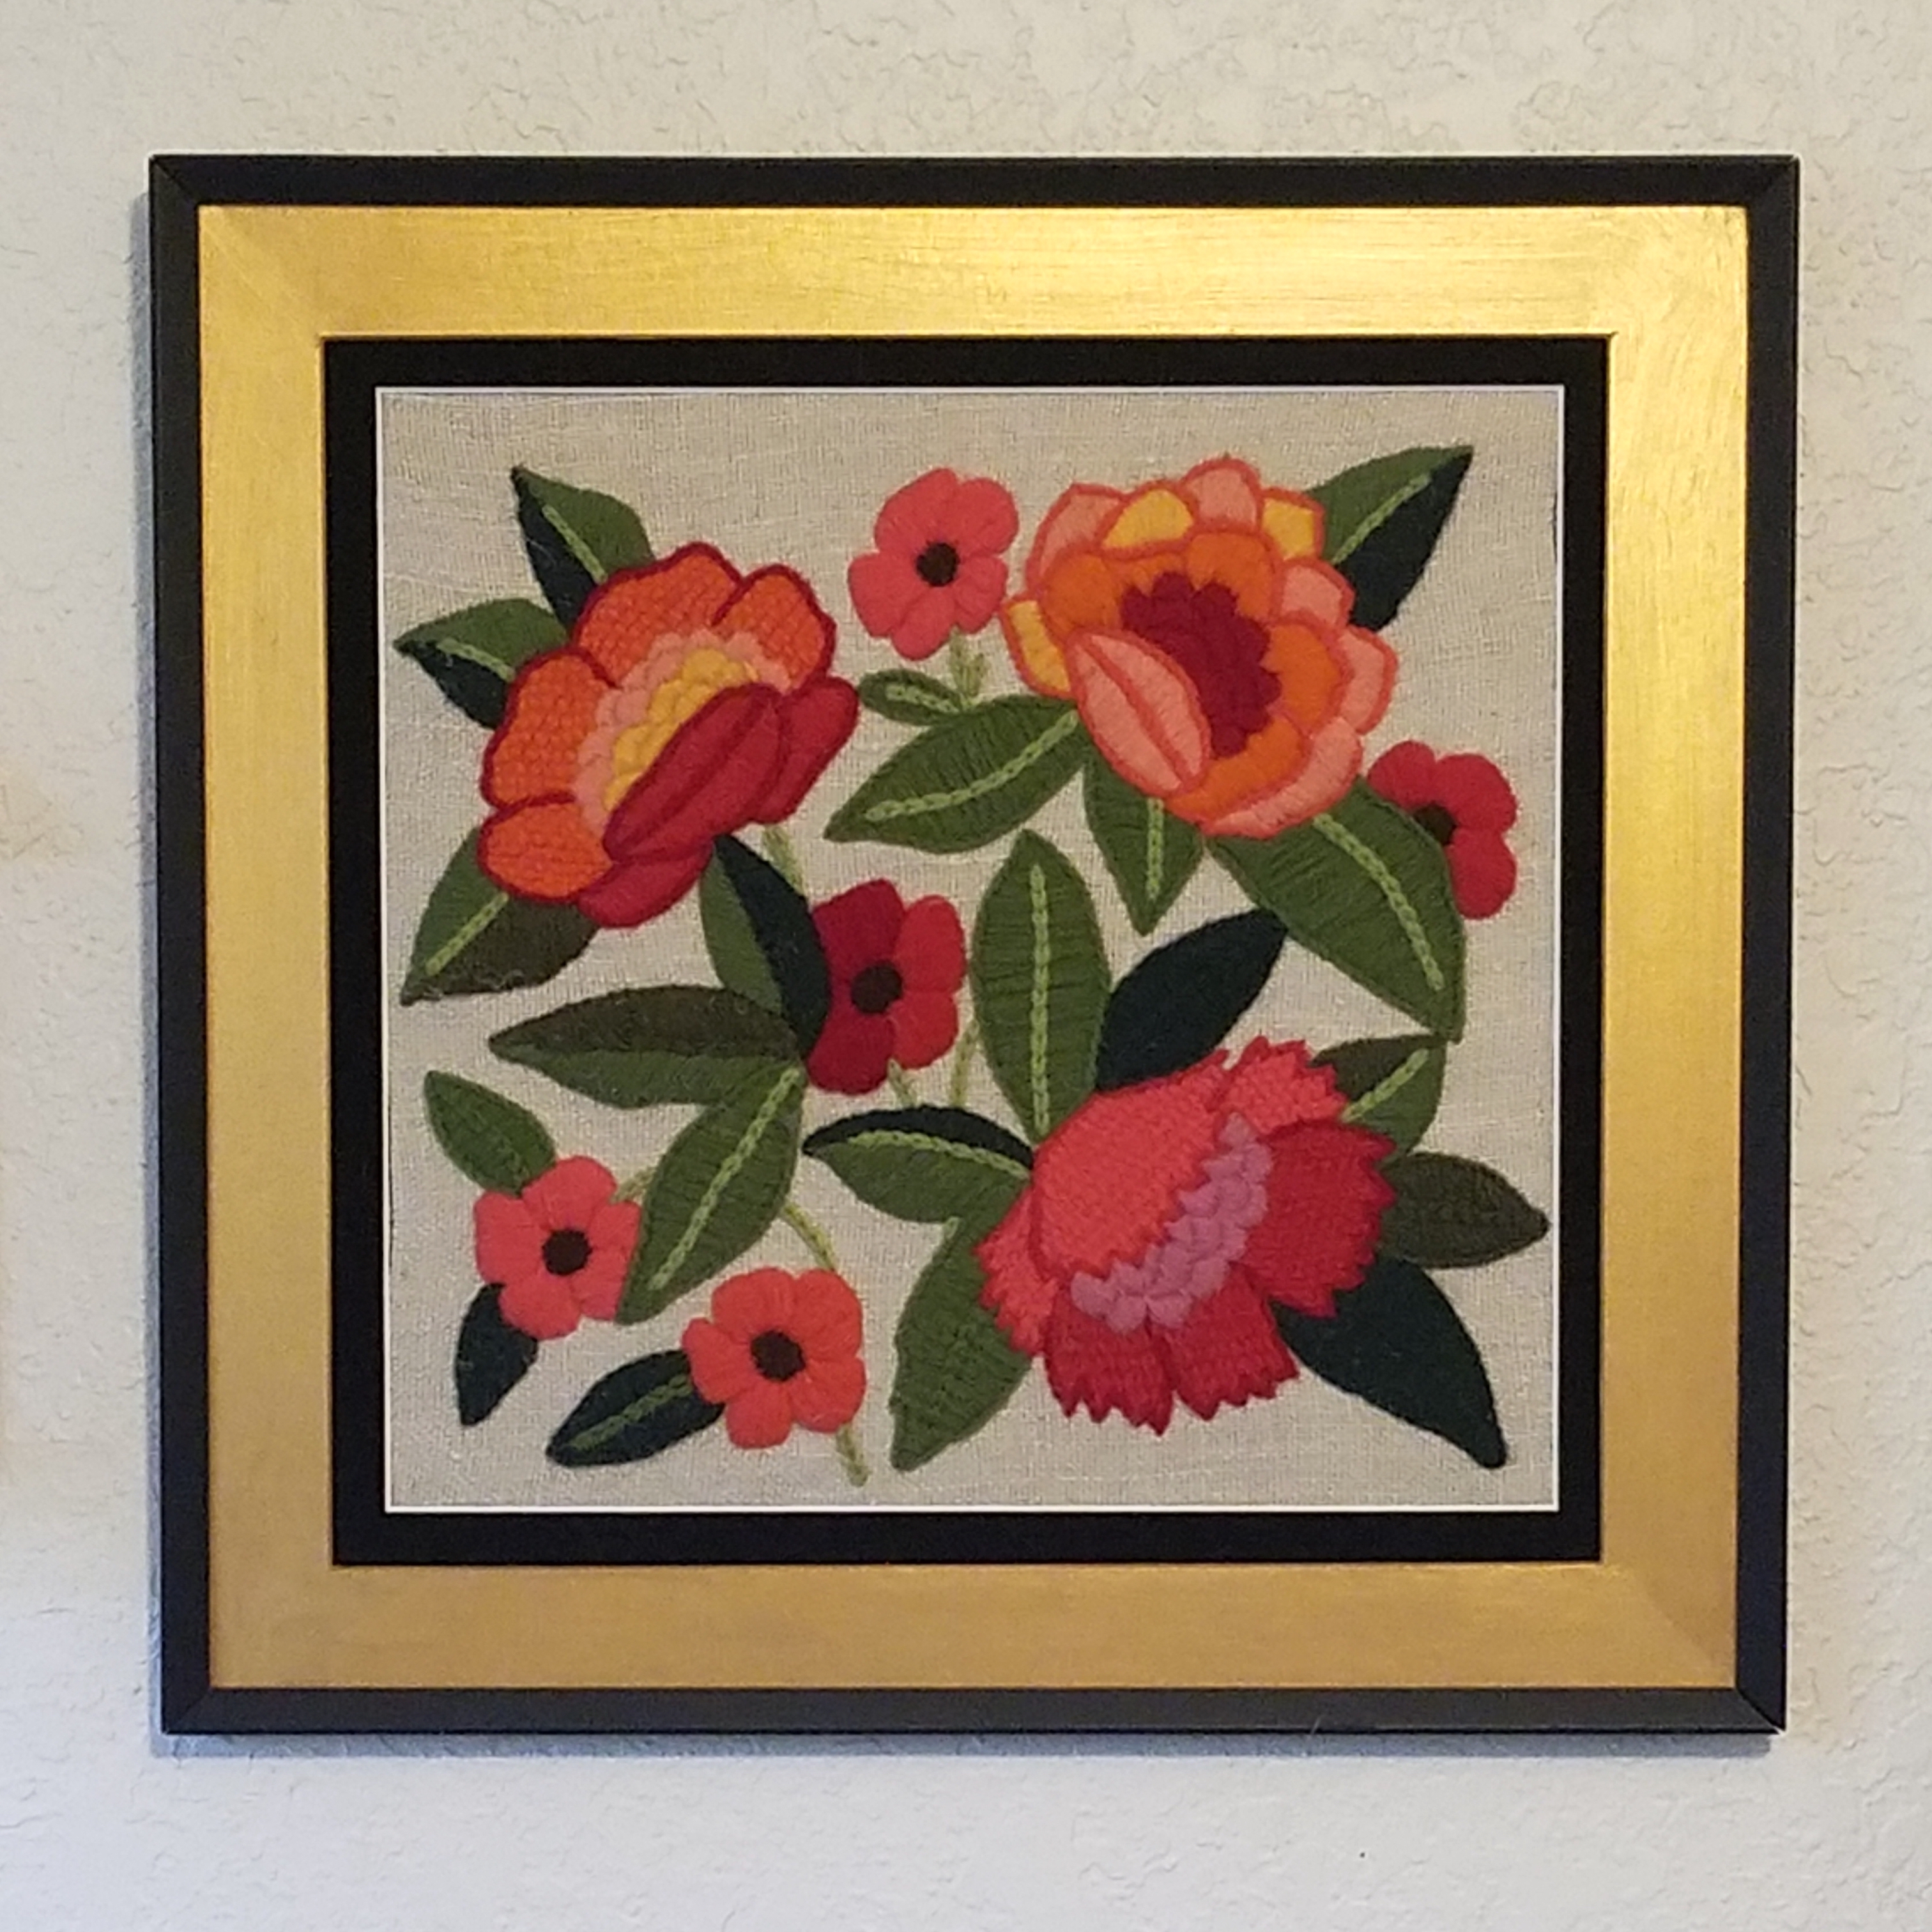 Three large and five small flowers in predominantly red and orange colors are embroidered on tan fabric, with a gold and black frame.